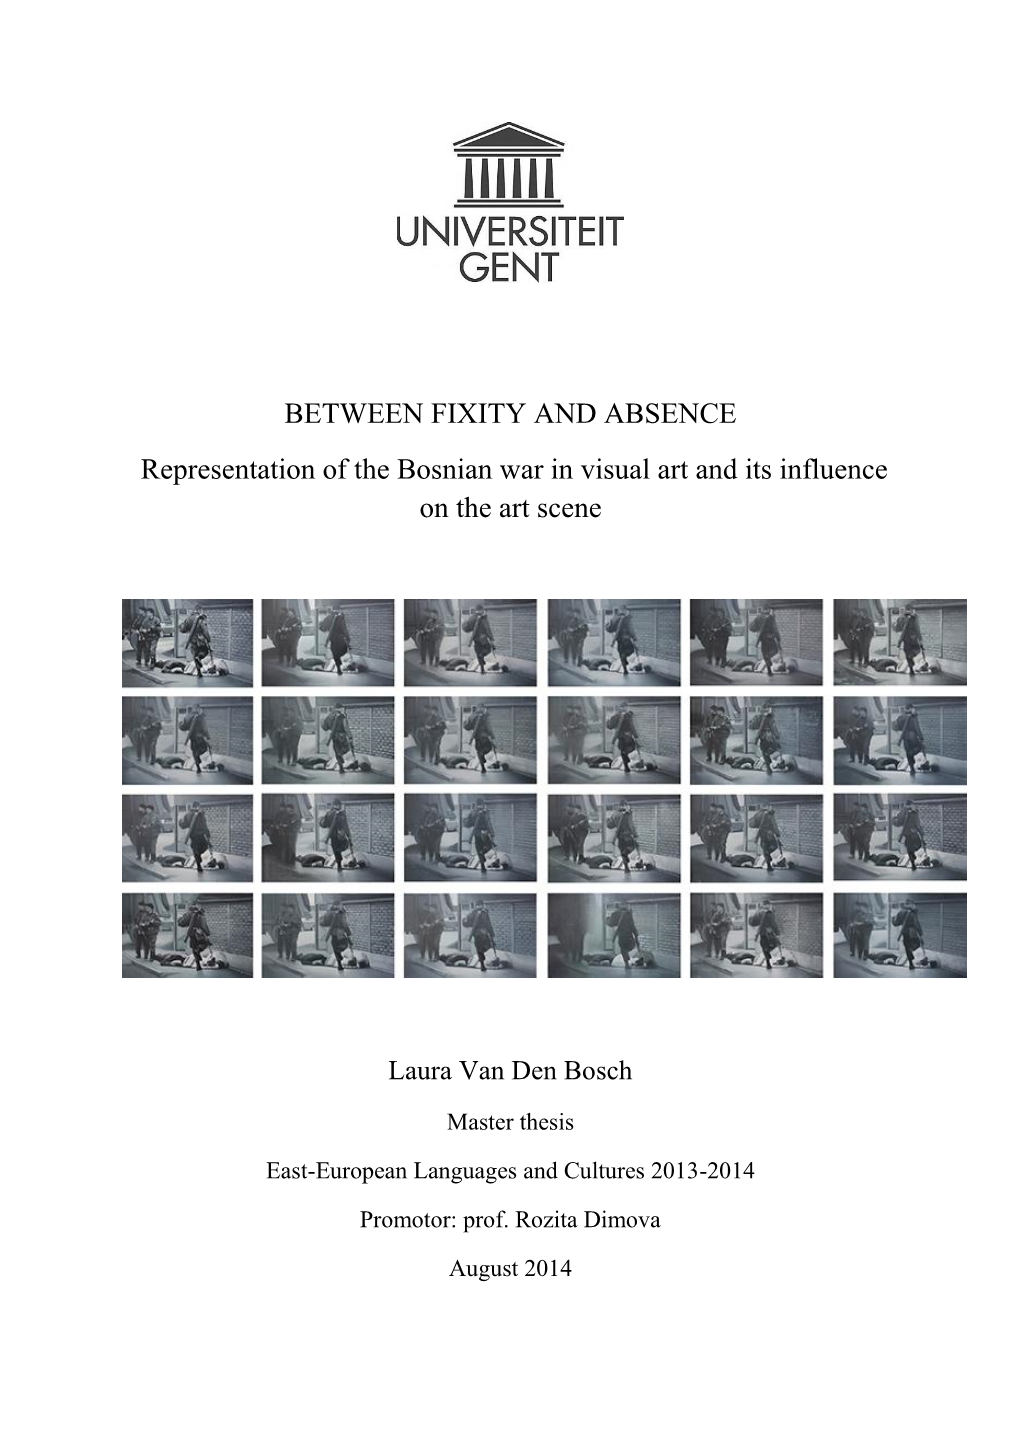 BETWEEN FIXITY and ABSENCE Representation of the Bosnian War in Visual Art and Its Influence on the Art Scene